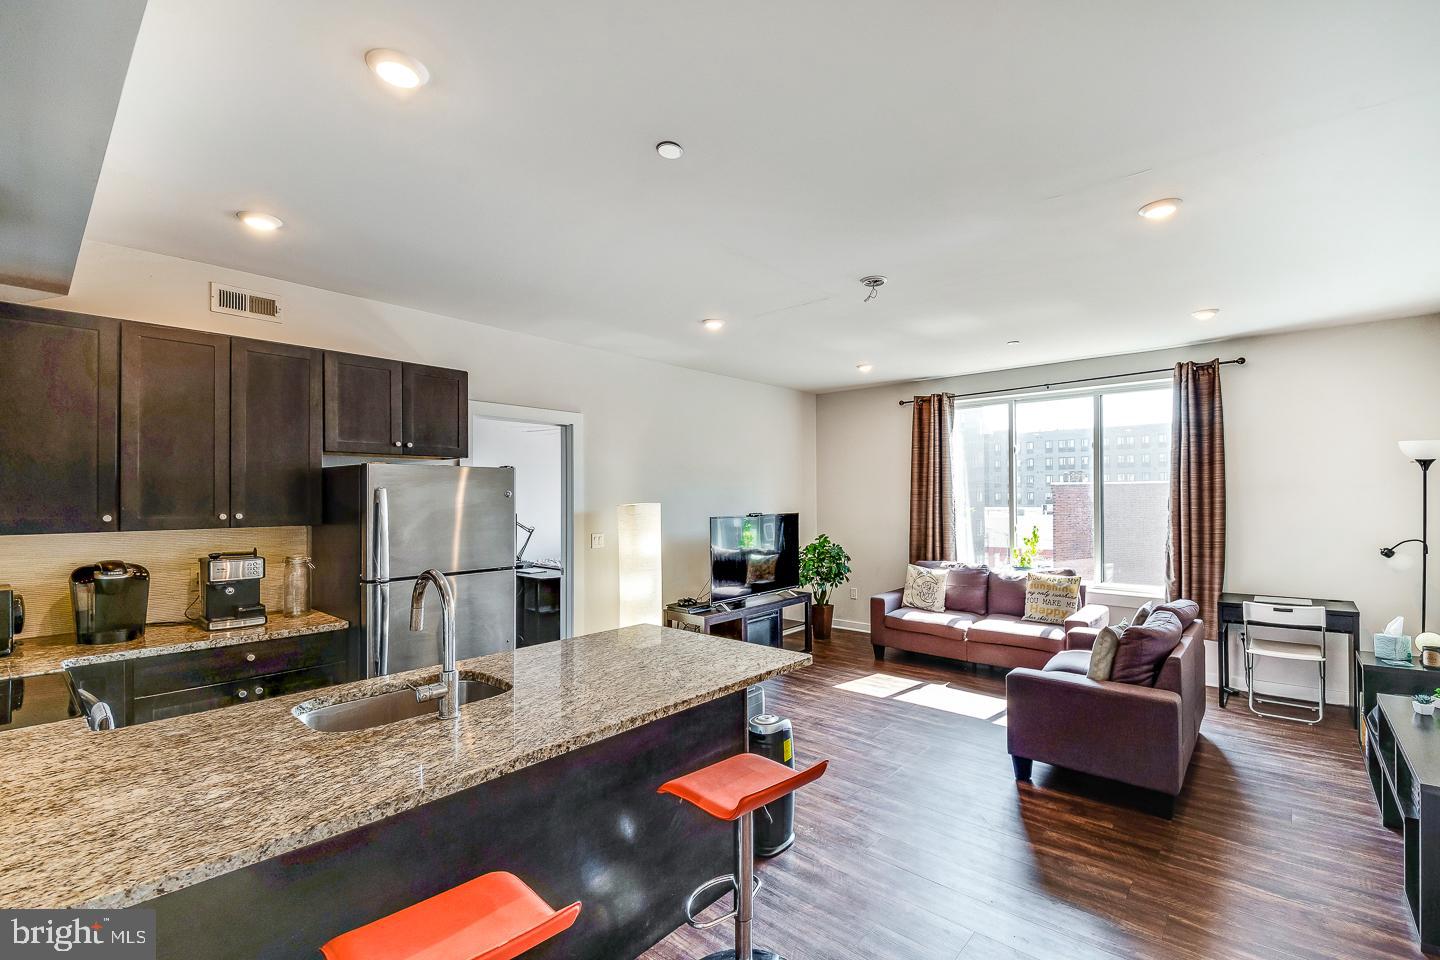 a living room with stainless steel appliances granite countertop a couch wooden floor and a refrigerator